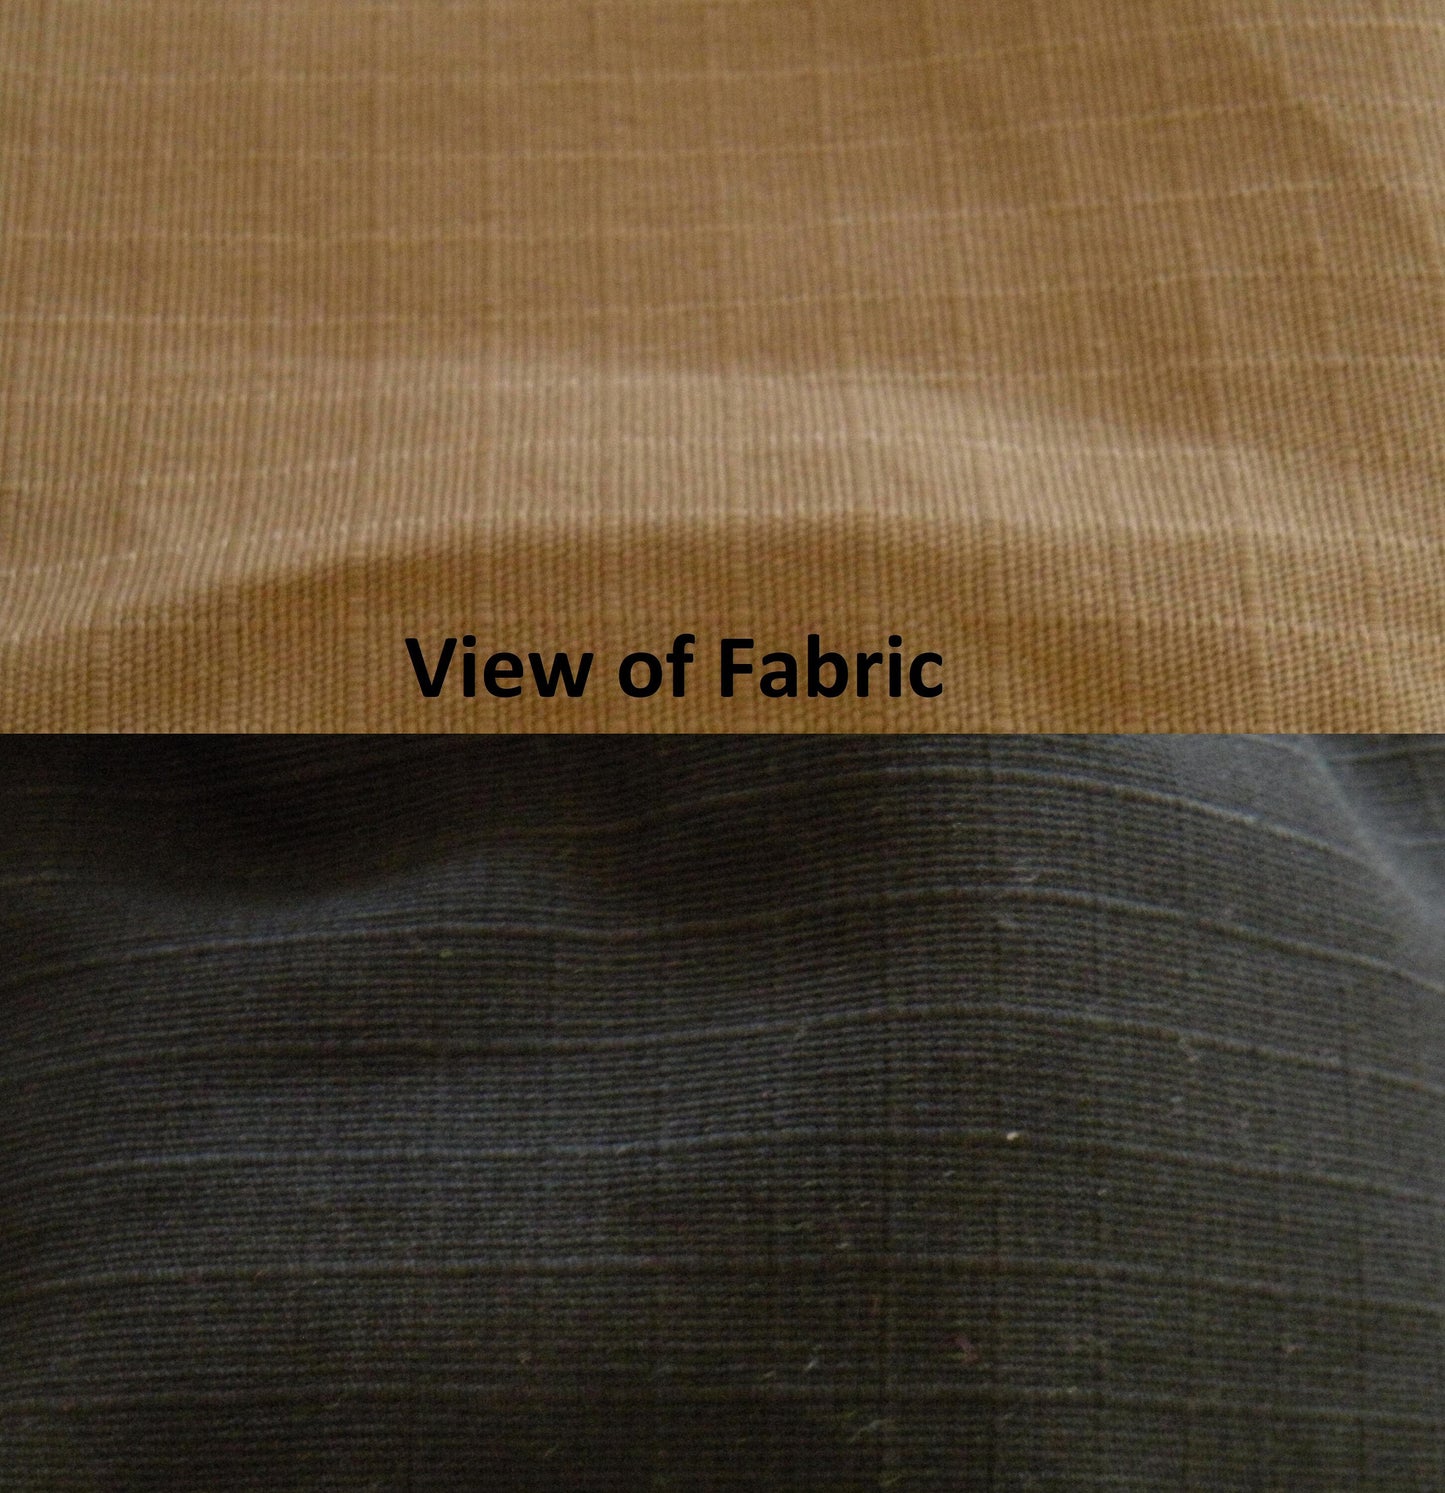 view of fabric 100% cotton ripstop